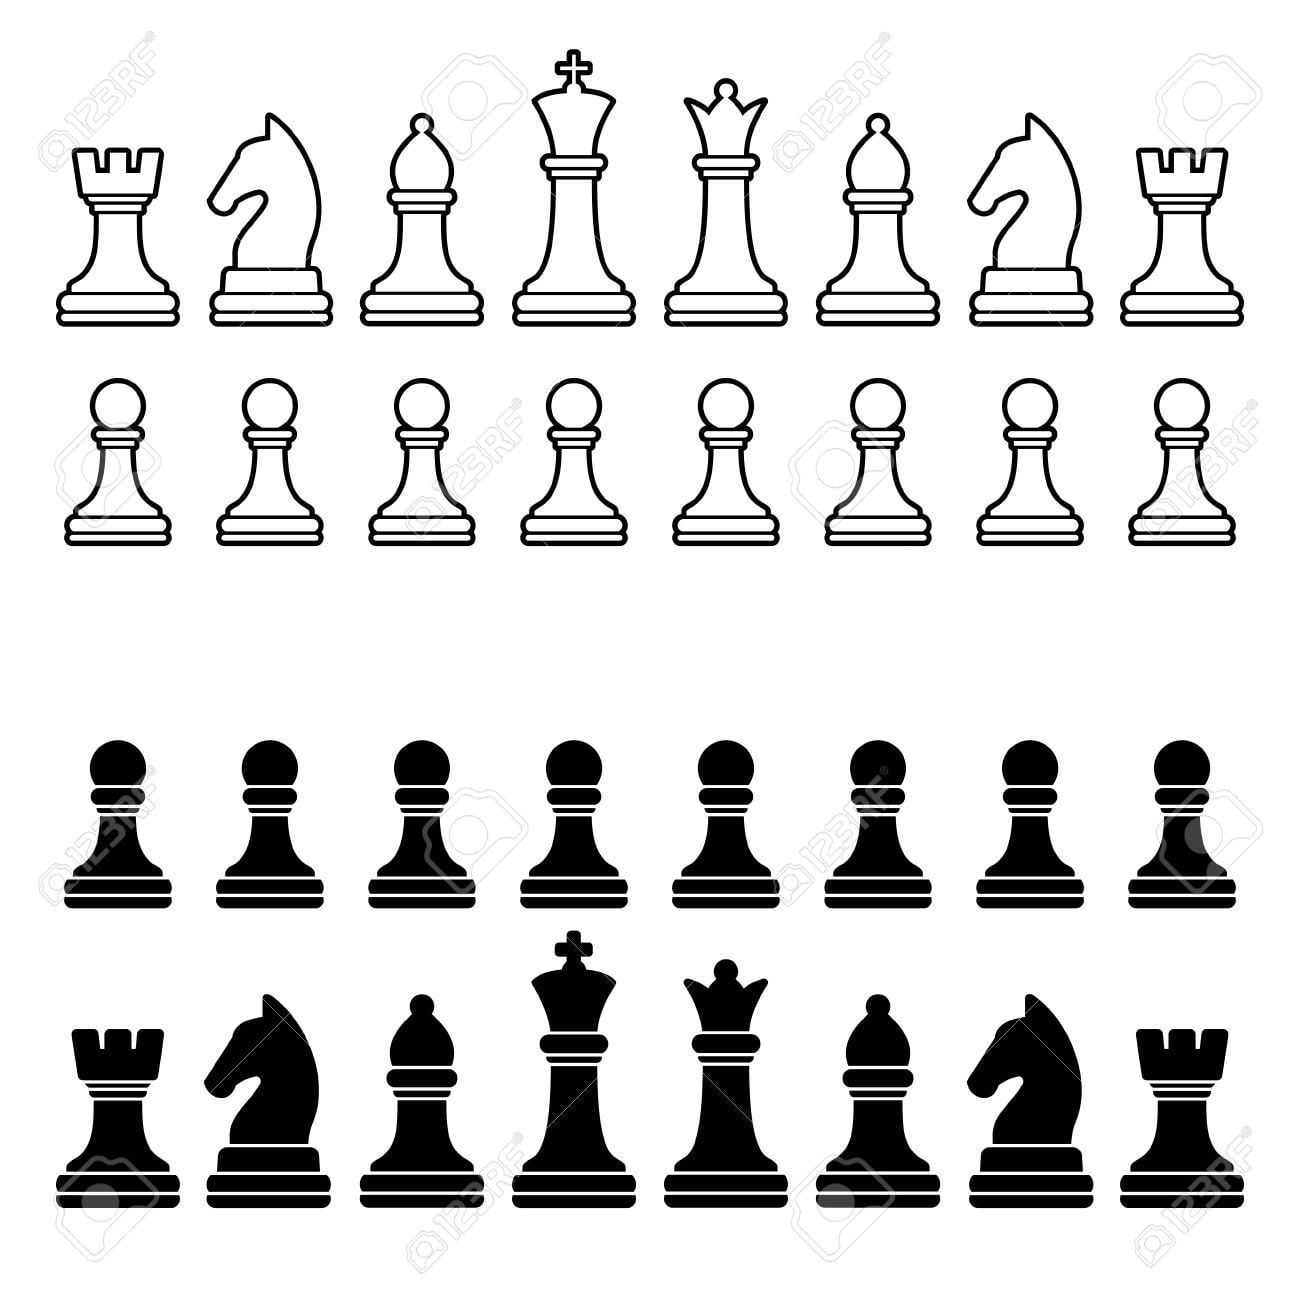 Chess Pieces Silhouette Black And White Set Illustration Chess Pieces Chess Chess Board